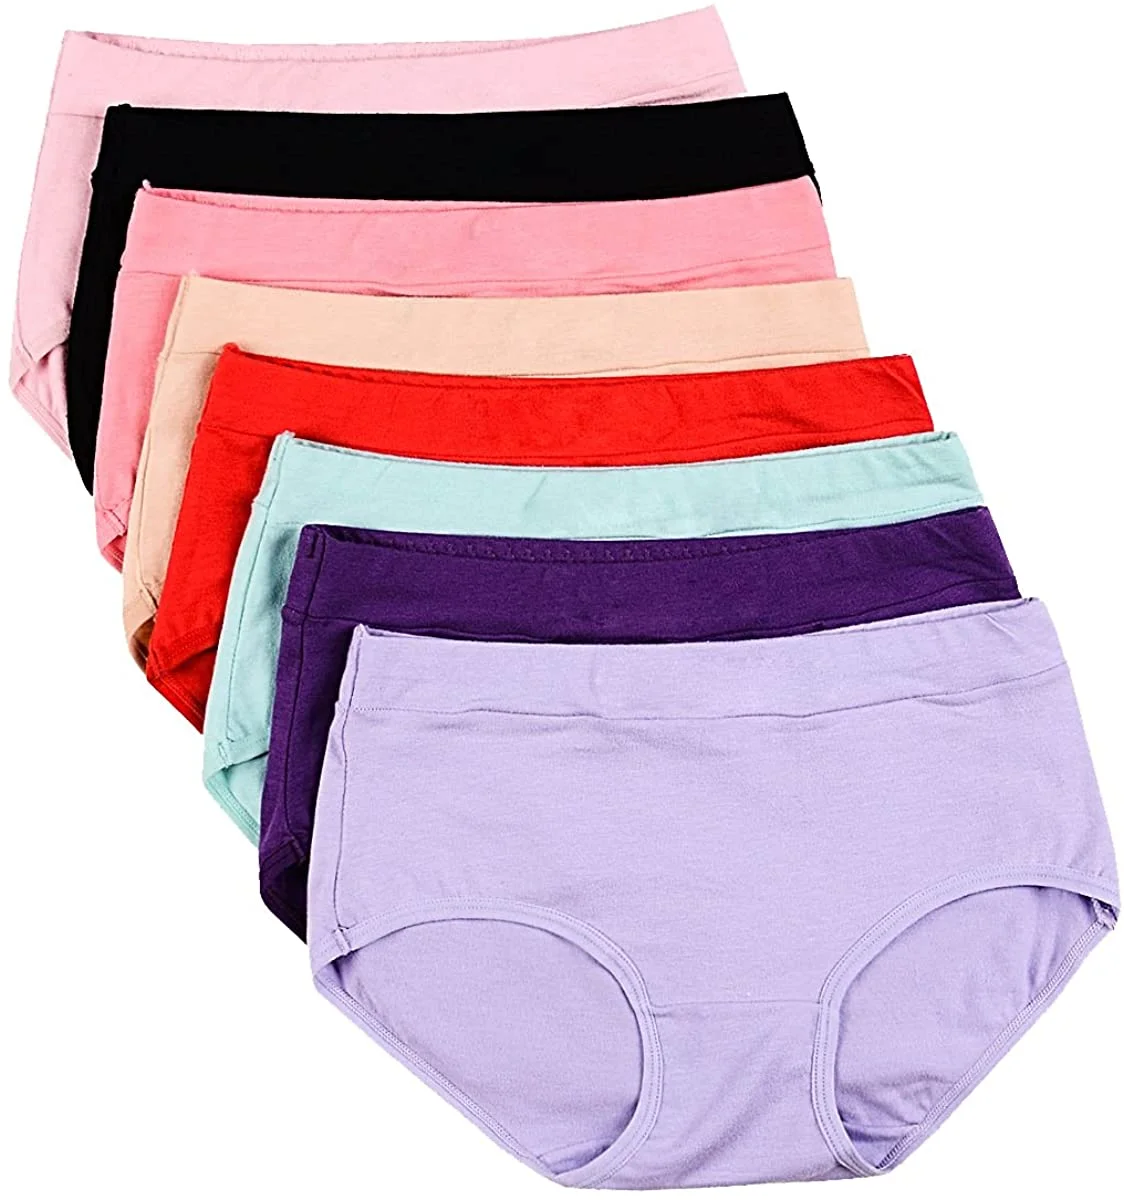 Hipster Panty - Bangladesh Factory, Suppliers, Manufacturers